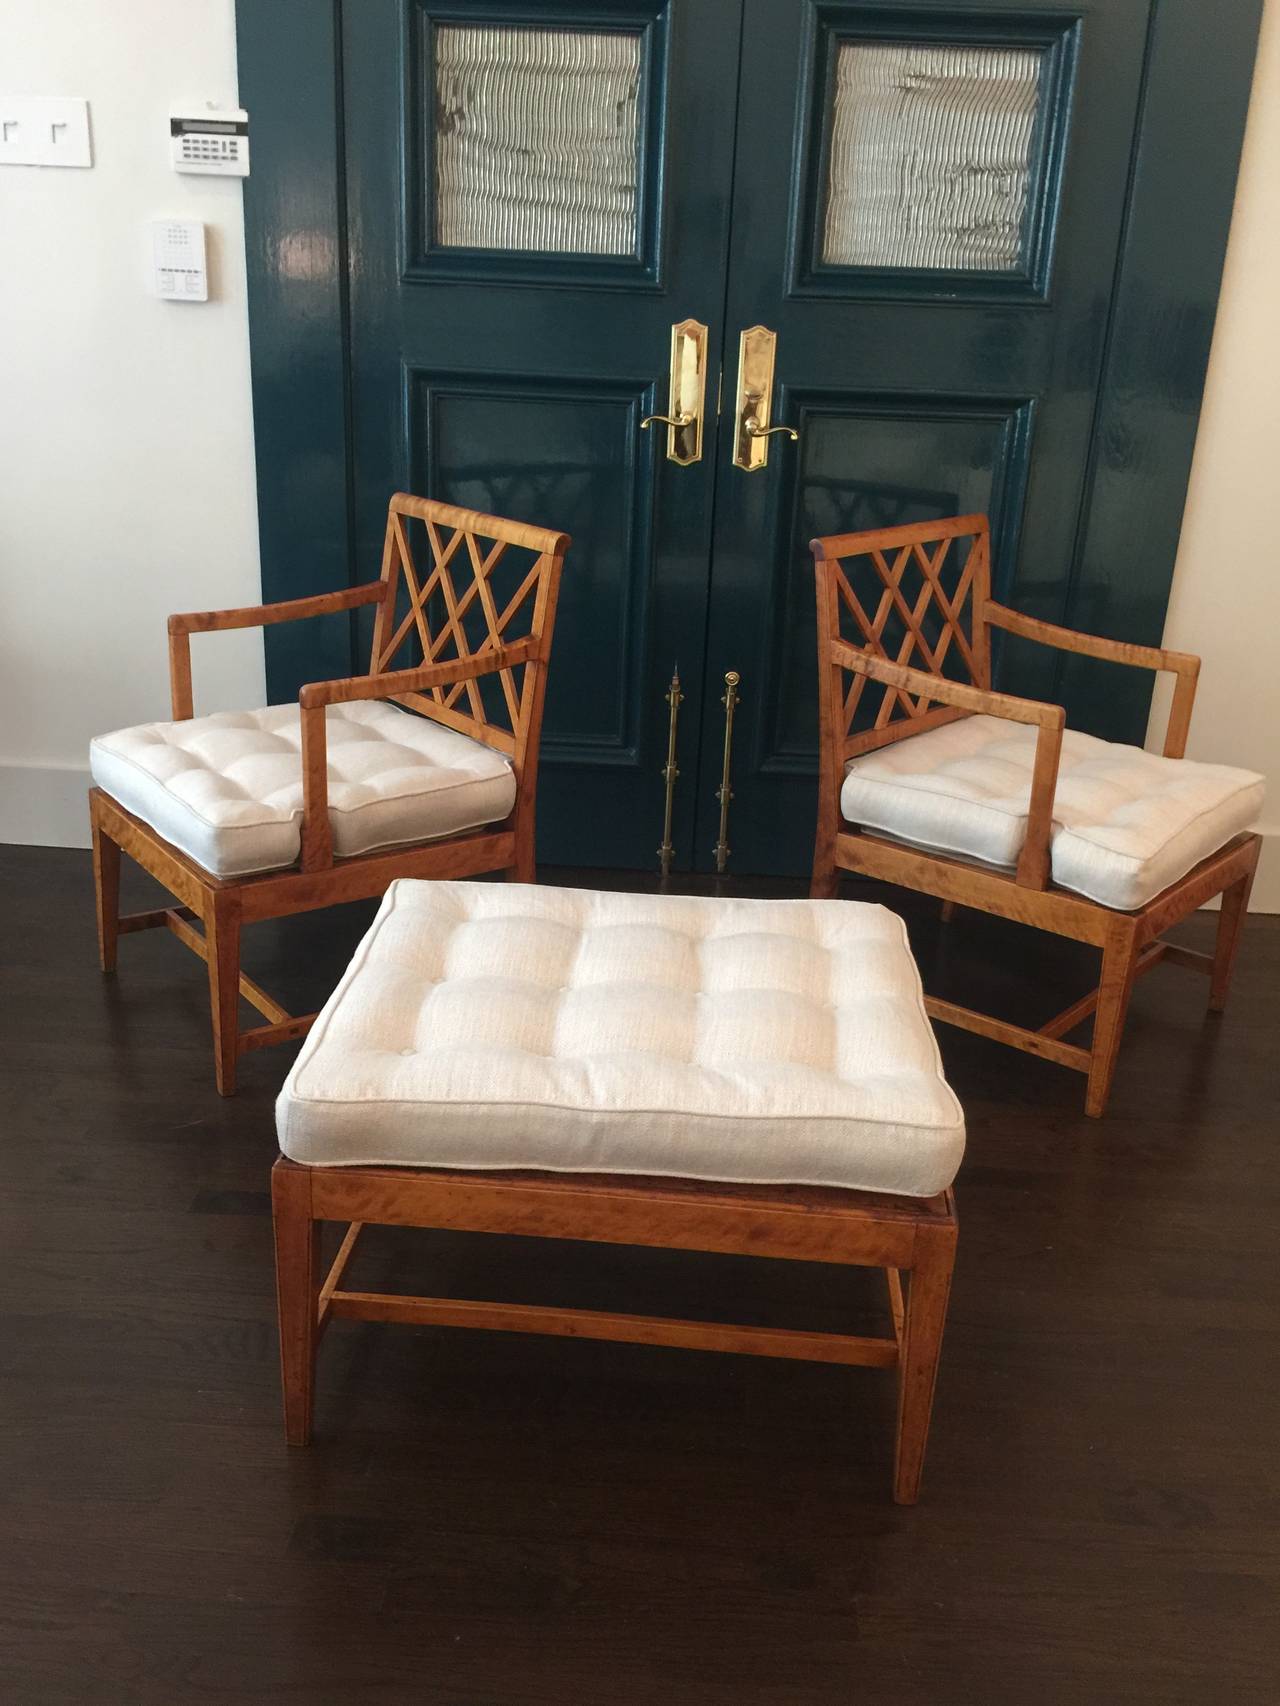 Beautiful pair of armchairs and ottoman in flamed birch by Swedish master, Carl Malmsten. Newly upholstered cushions and light restoration to the wood. These chairs are beautiful examples of early Swedish refined cabinetmaker work.

Chairs: 22.5